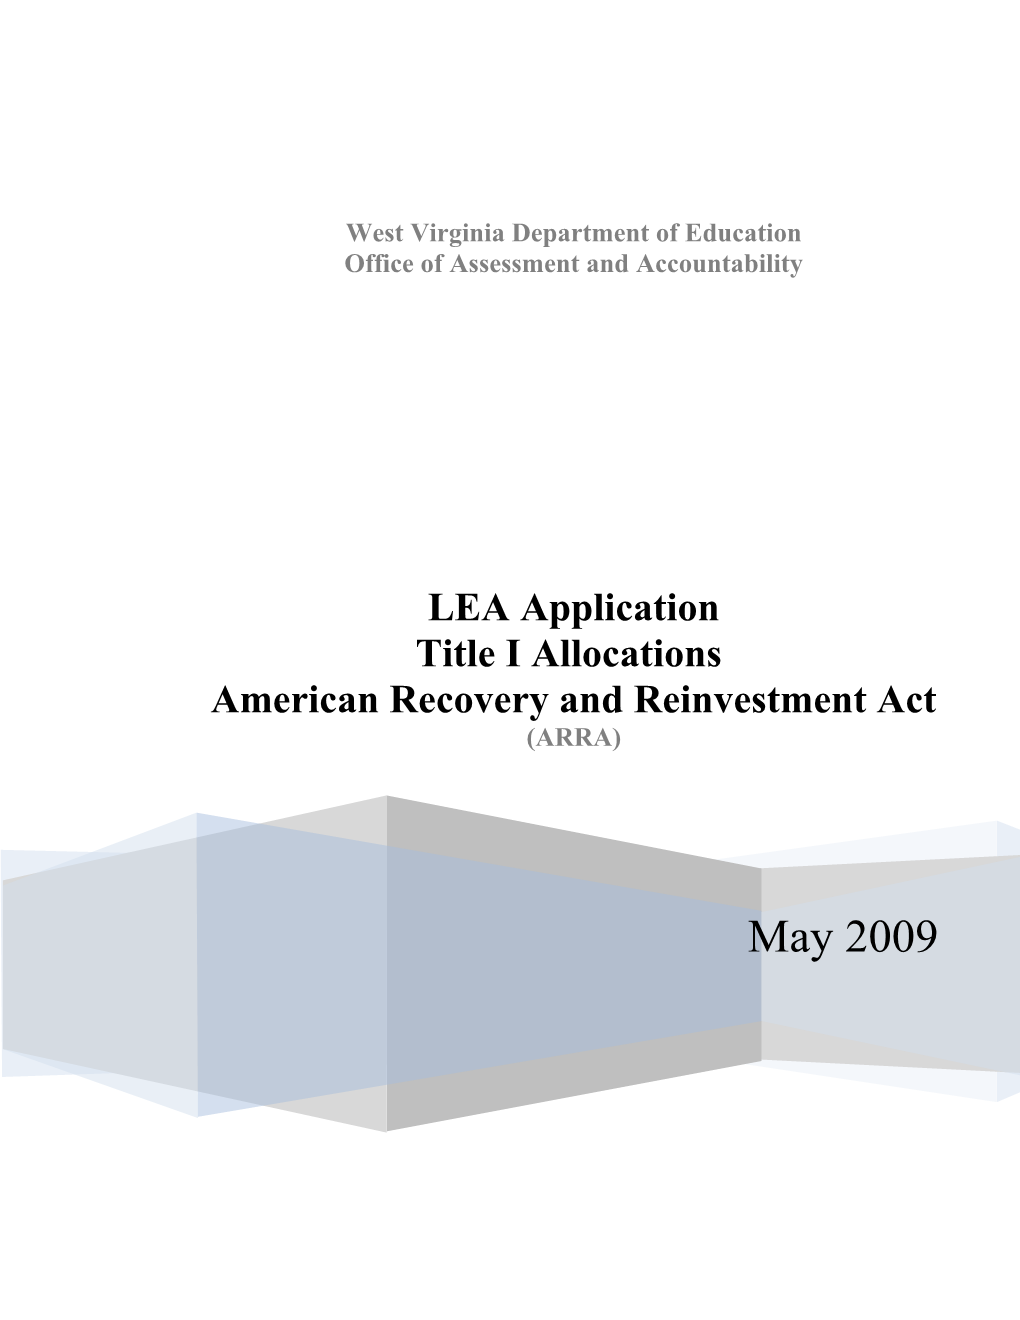 LEA Application for Title I Part a Stimulus Funding